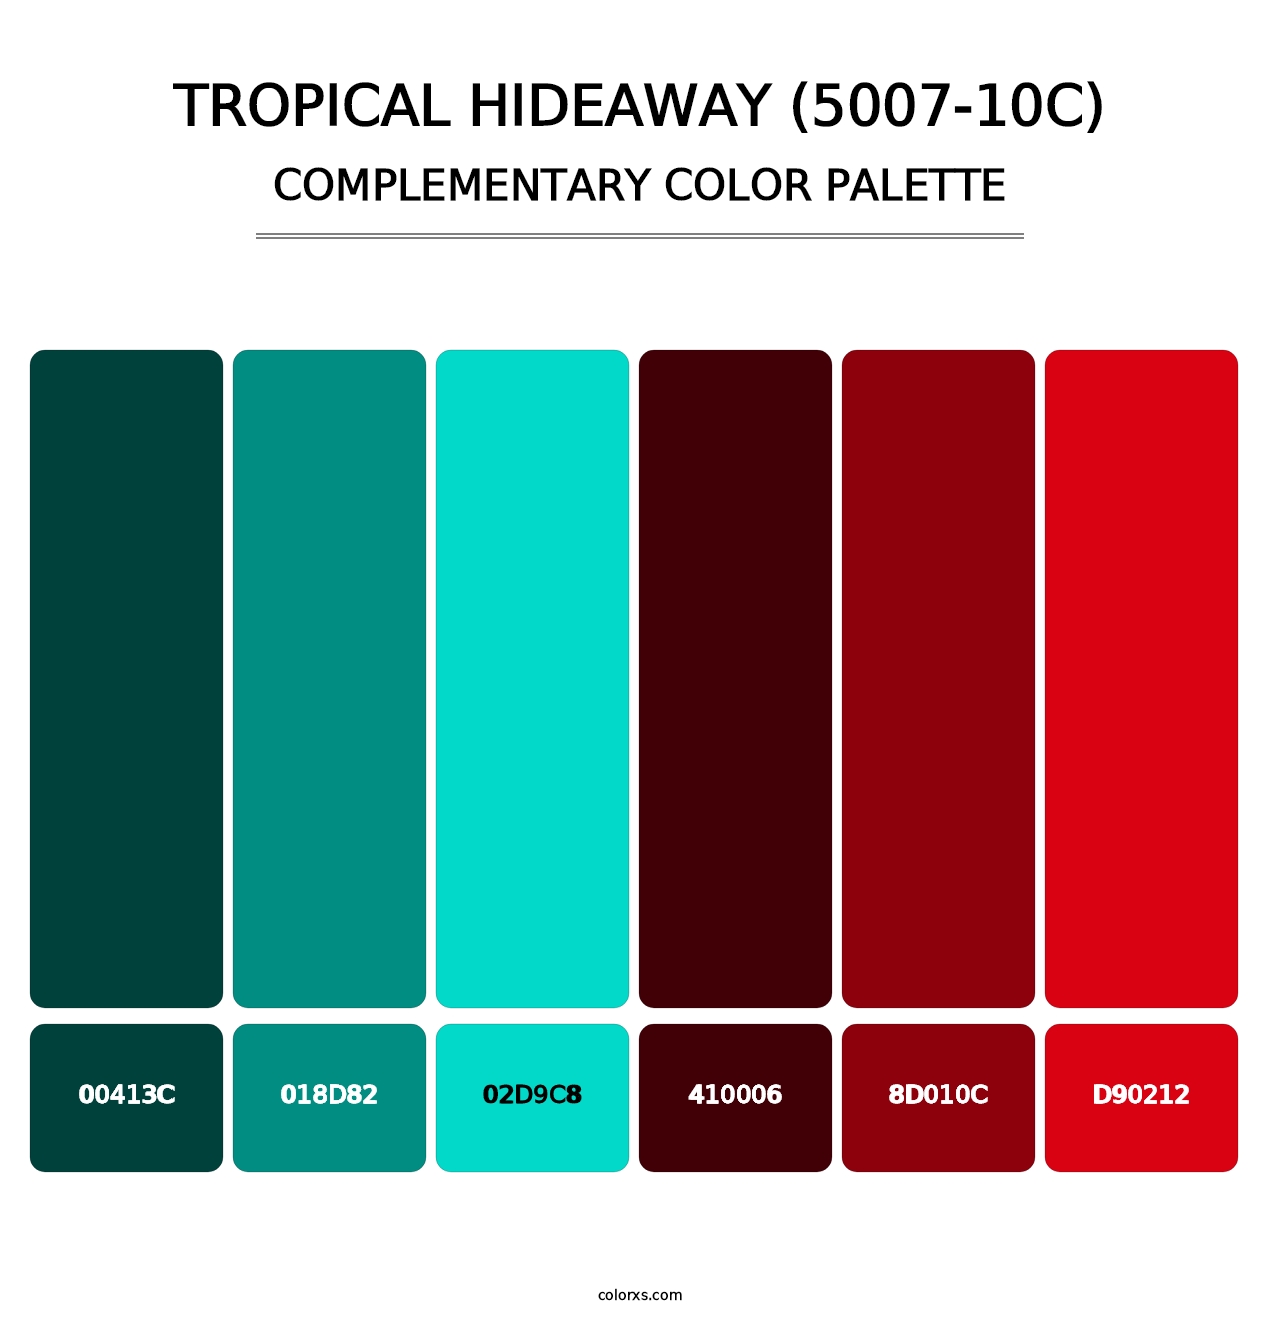 Tropical Hideaway (5007-10C) - Complementary Color Palette